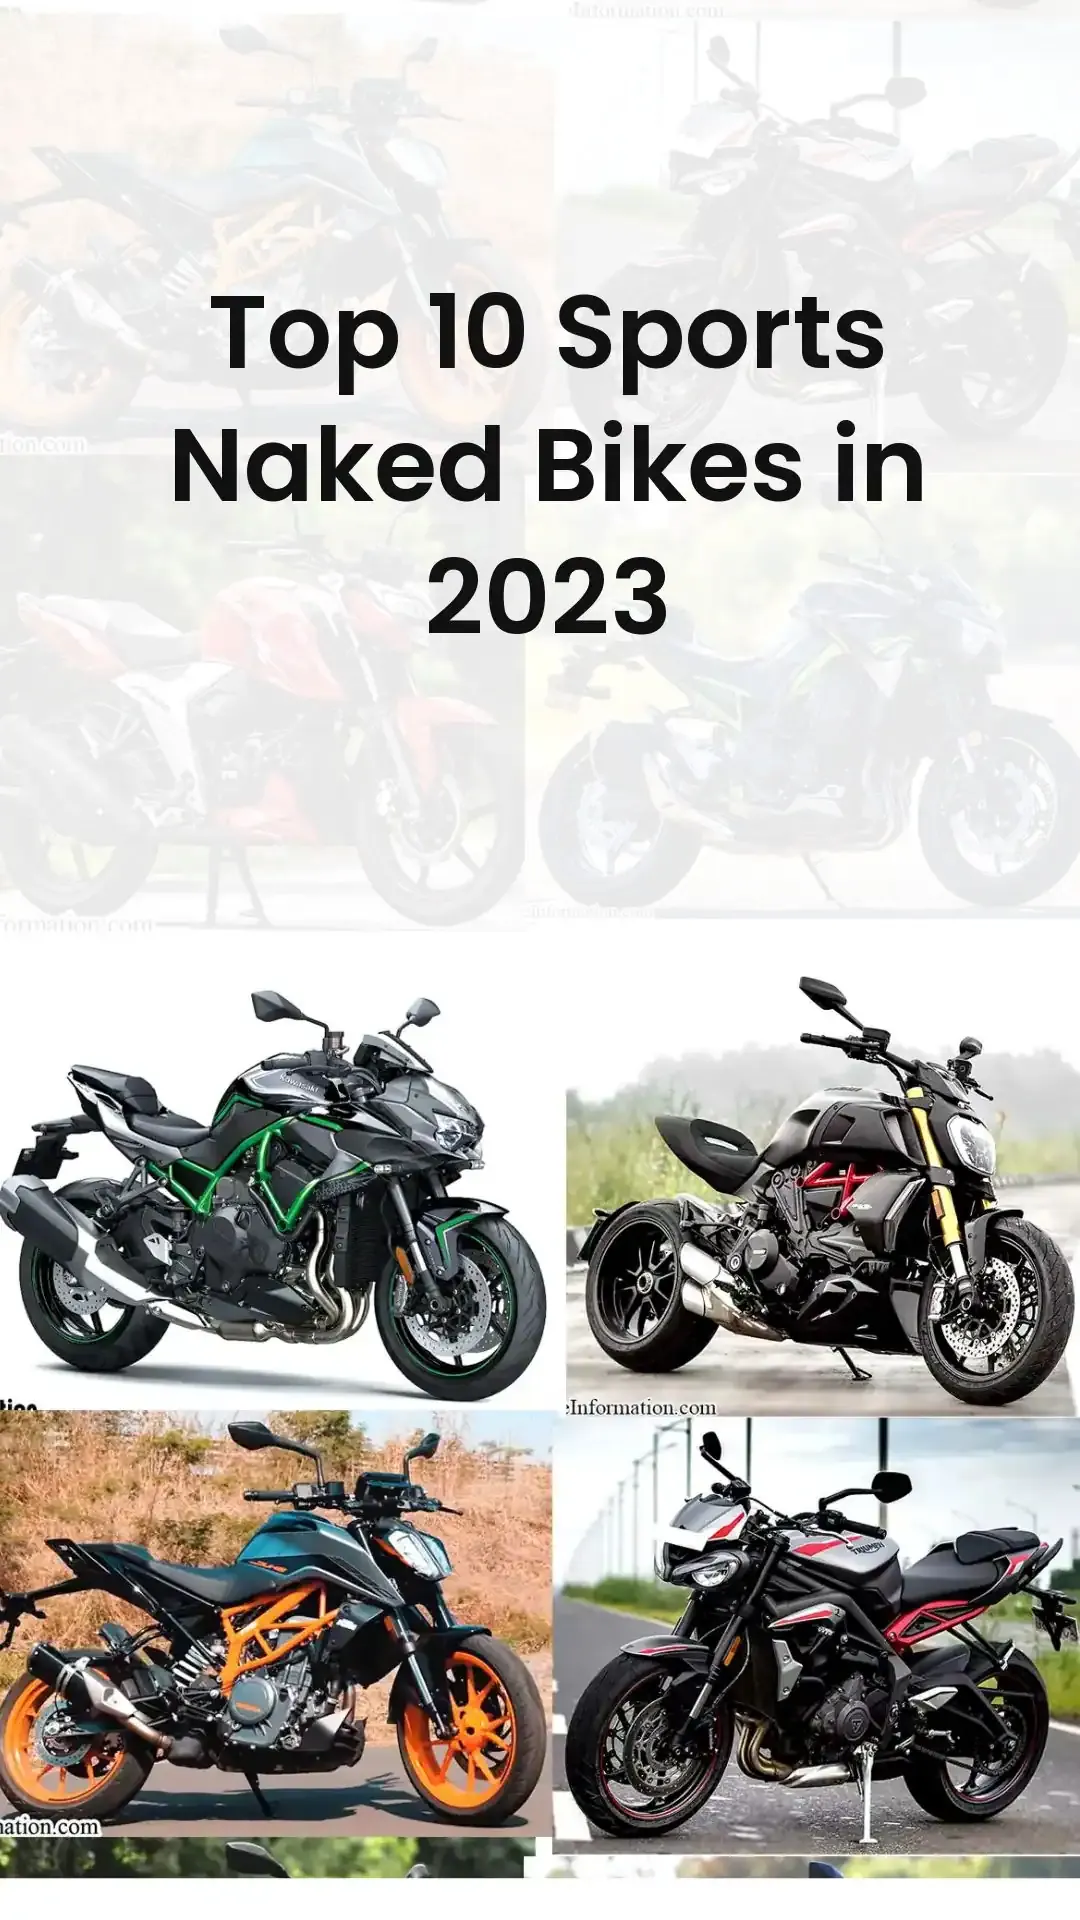 Top 10 Sports Naked Bikes in 2023